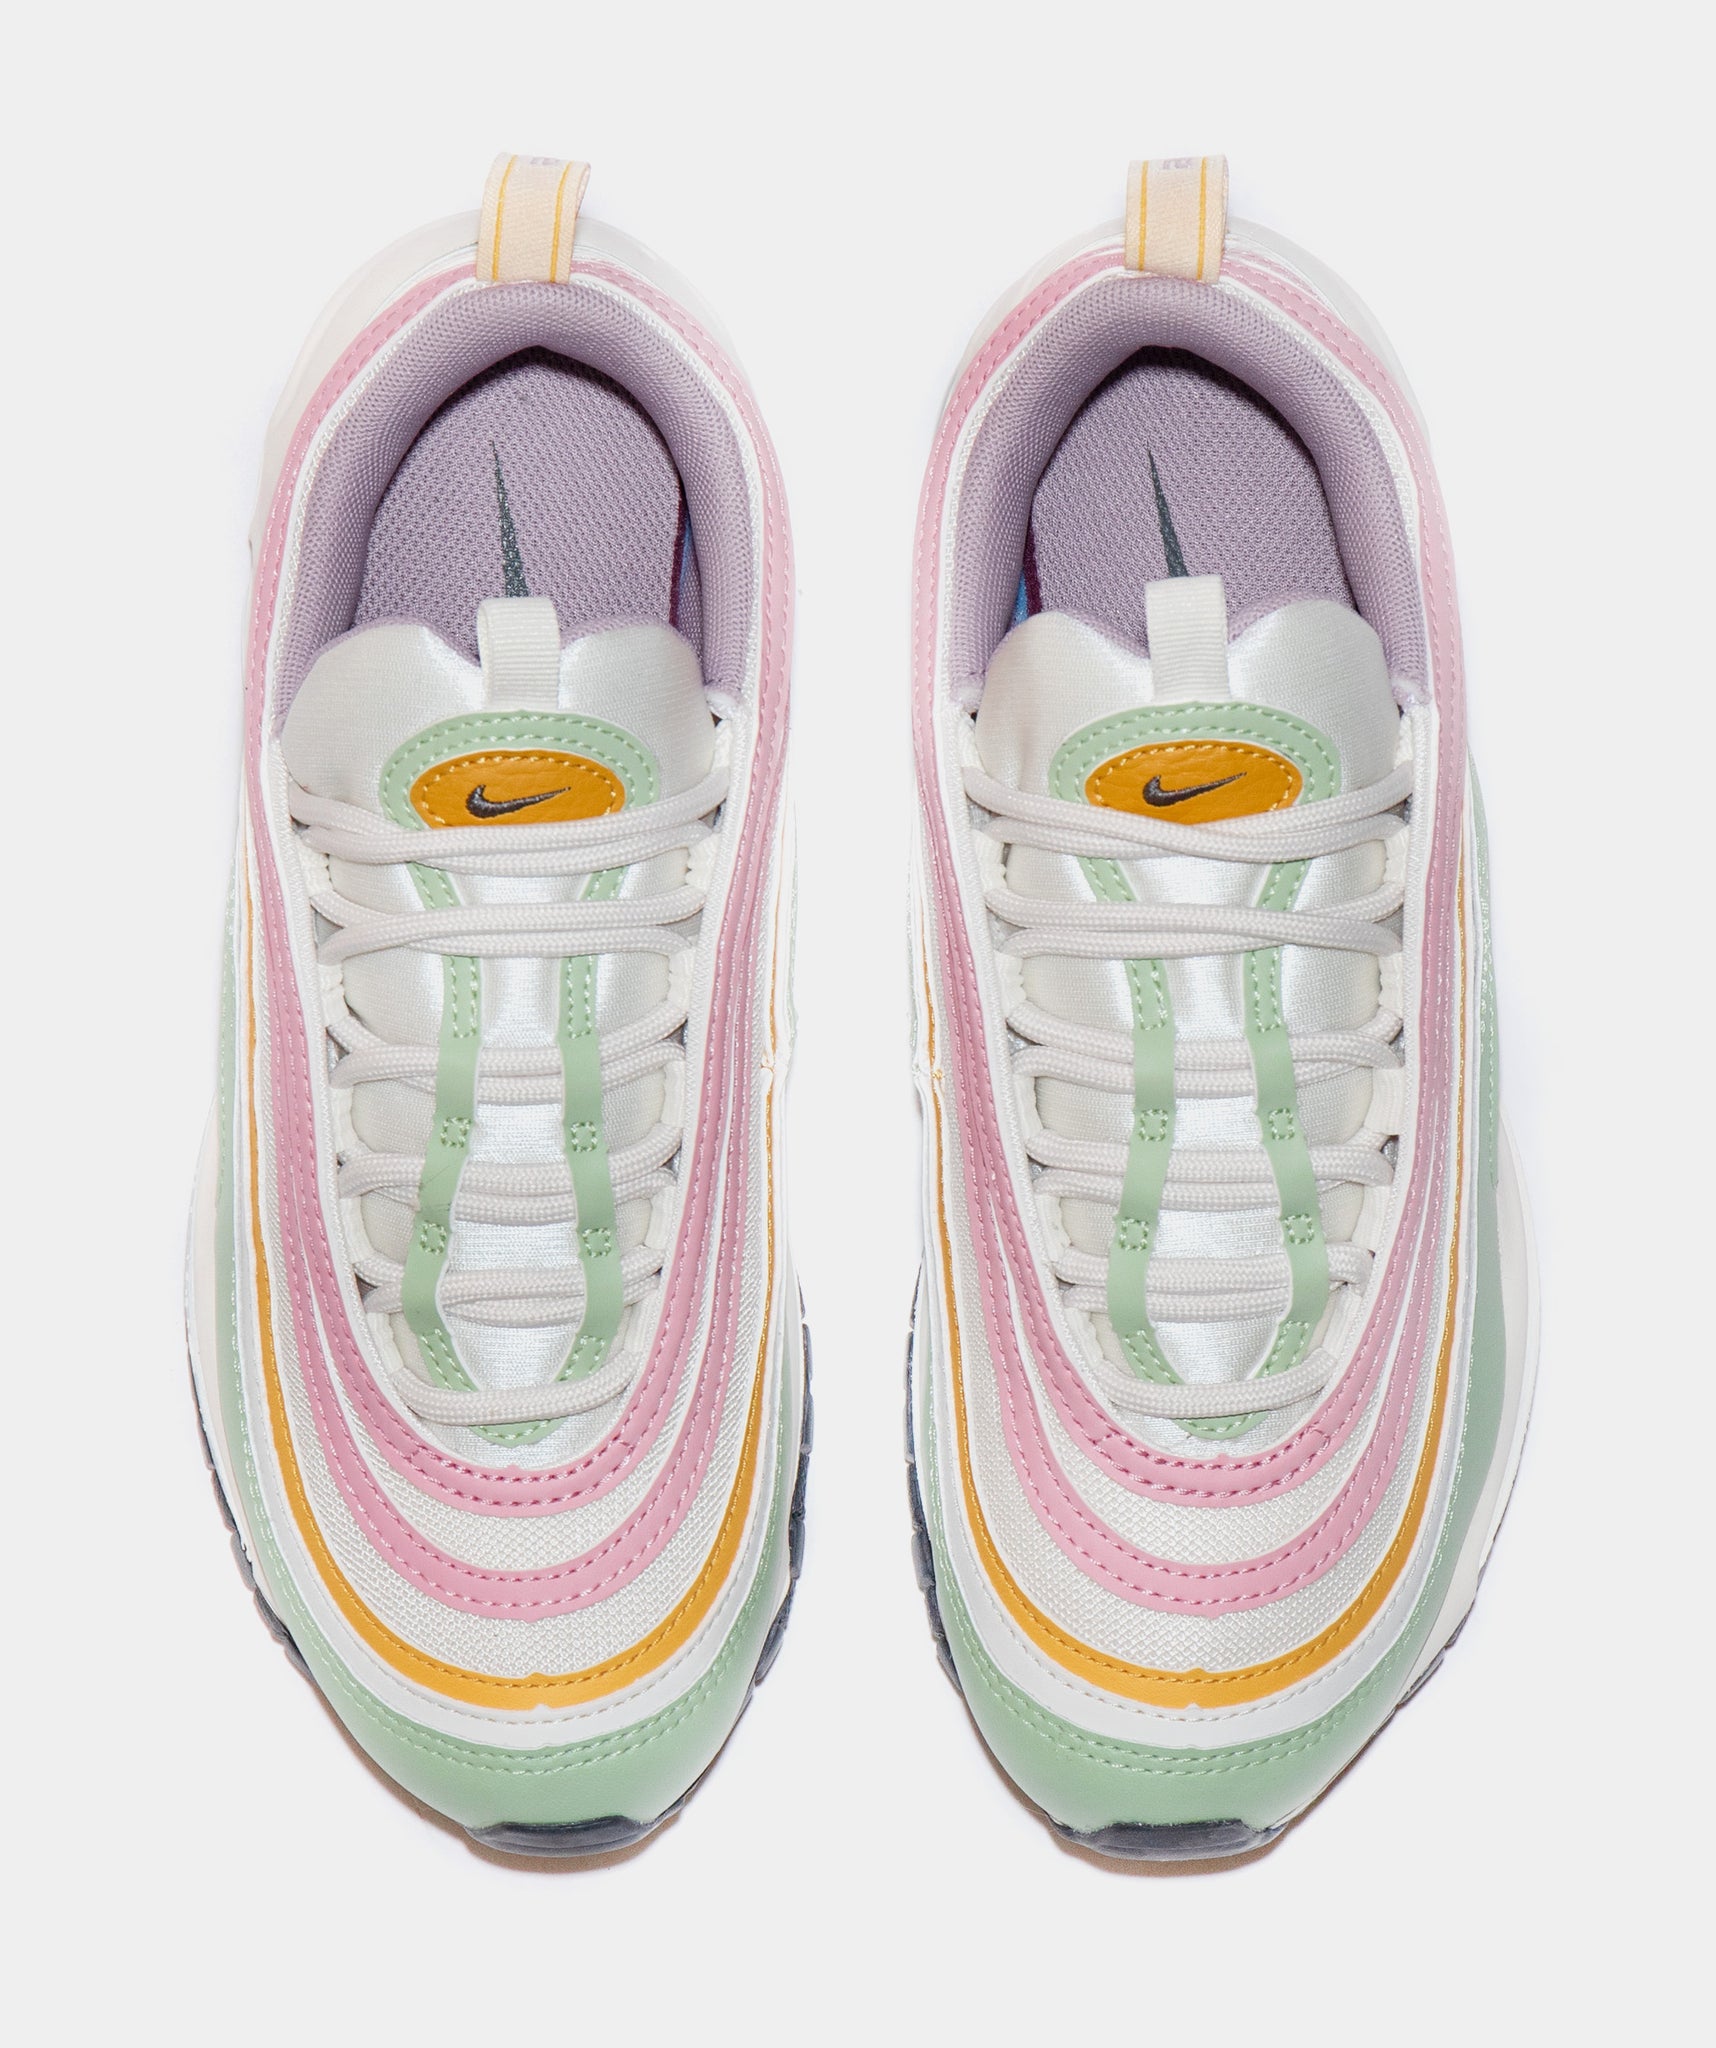 Nike Air Max 97 Baby/Toddler Shoes